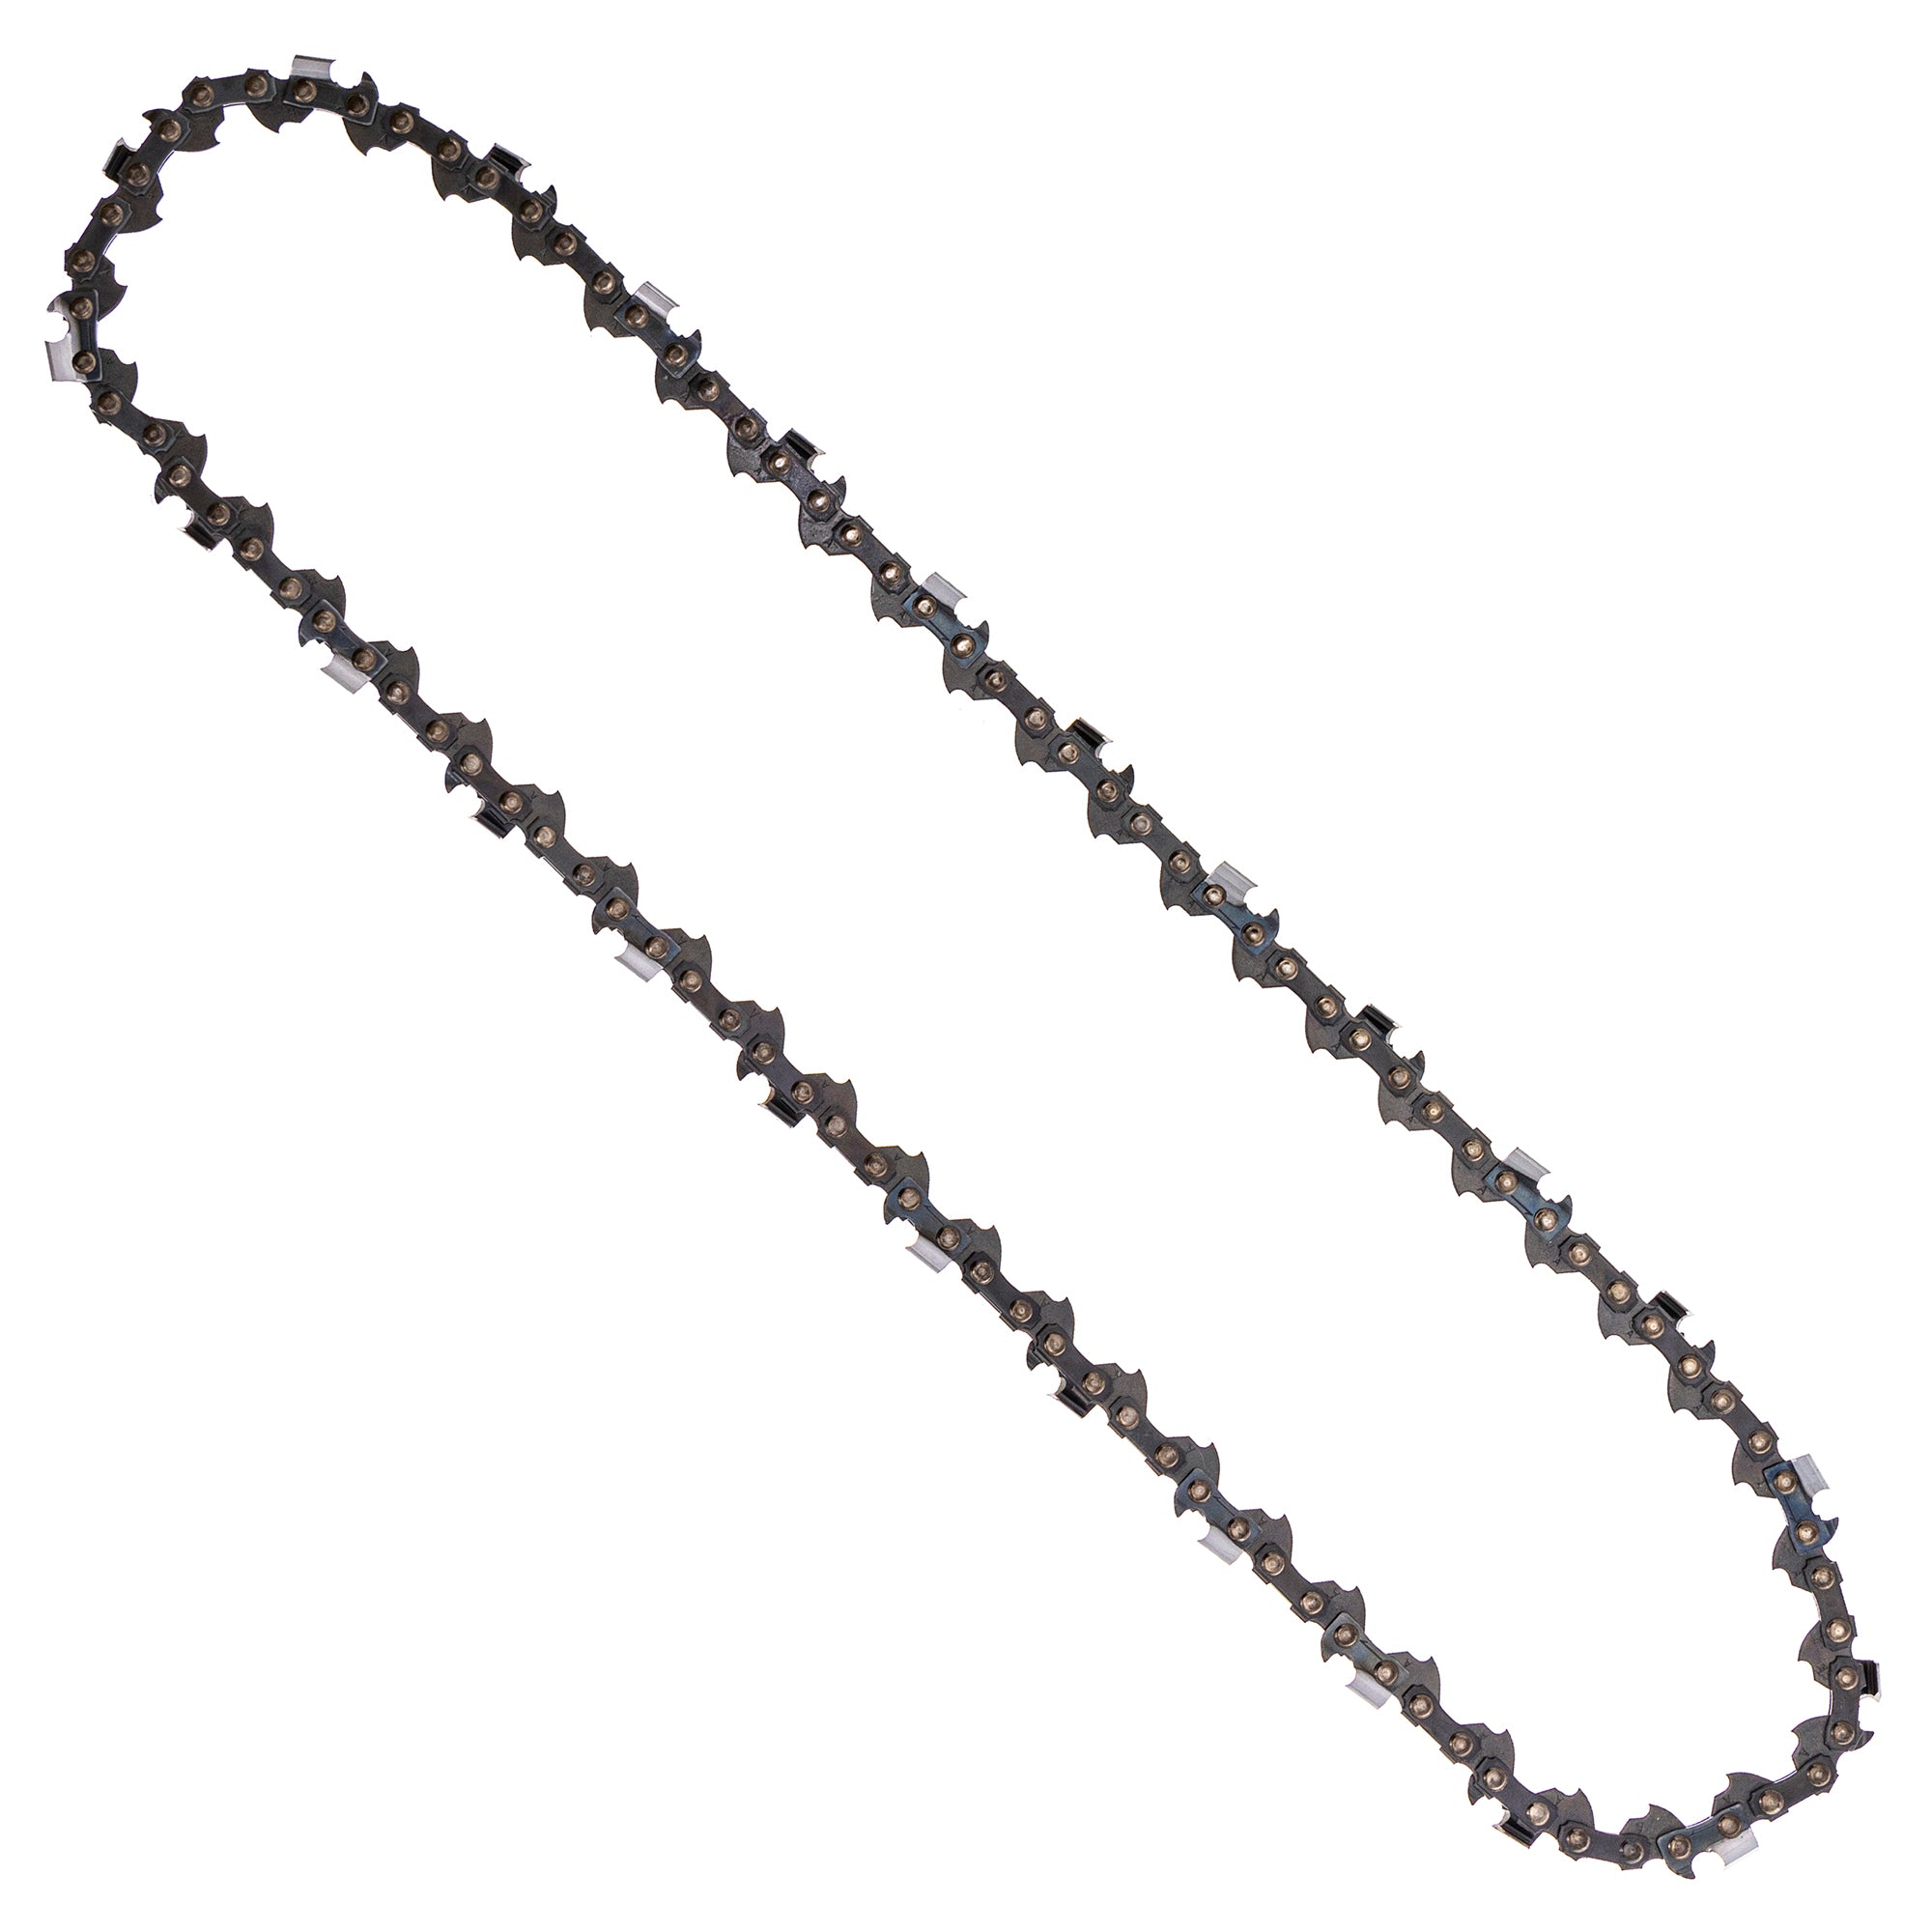 Chainsaw Chain 18 Inch .063 .325 68DL for zOTHER Stens Oregon Ref. Oregon Carlton MS 25 23 8TEN 810-CCC2227H